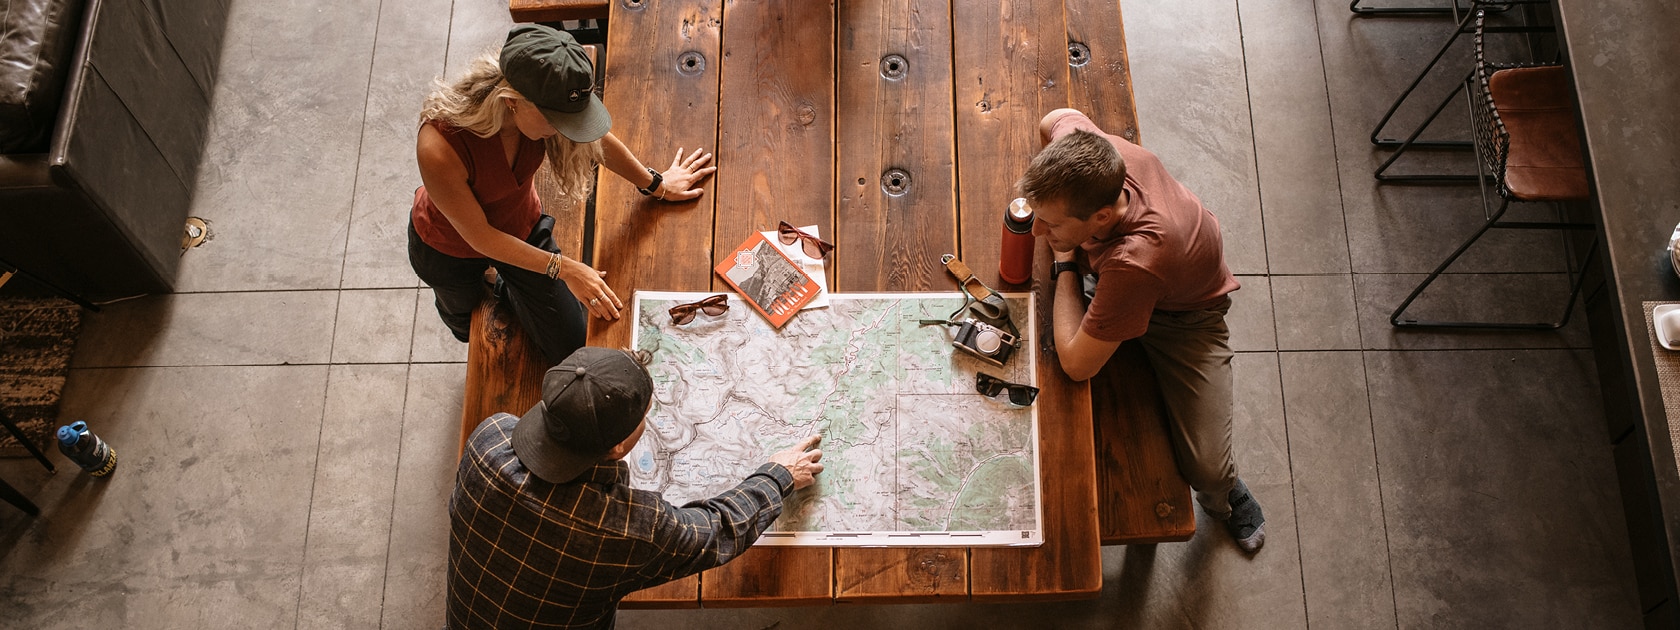 Overhead image of two men and a woman looking at a map on a table